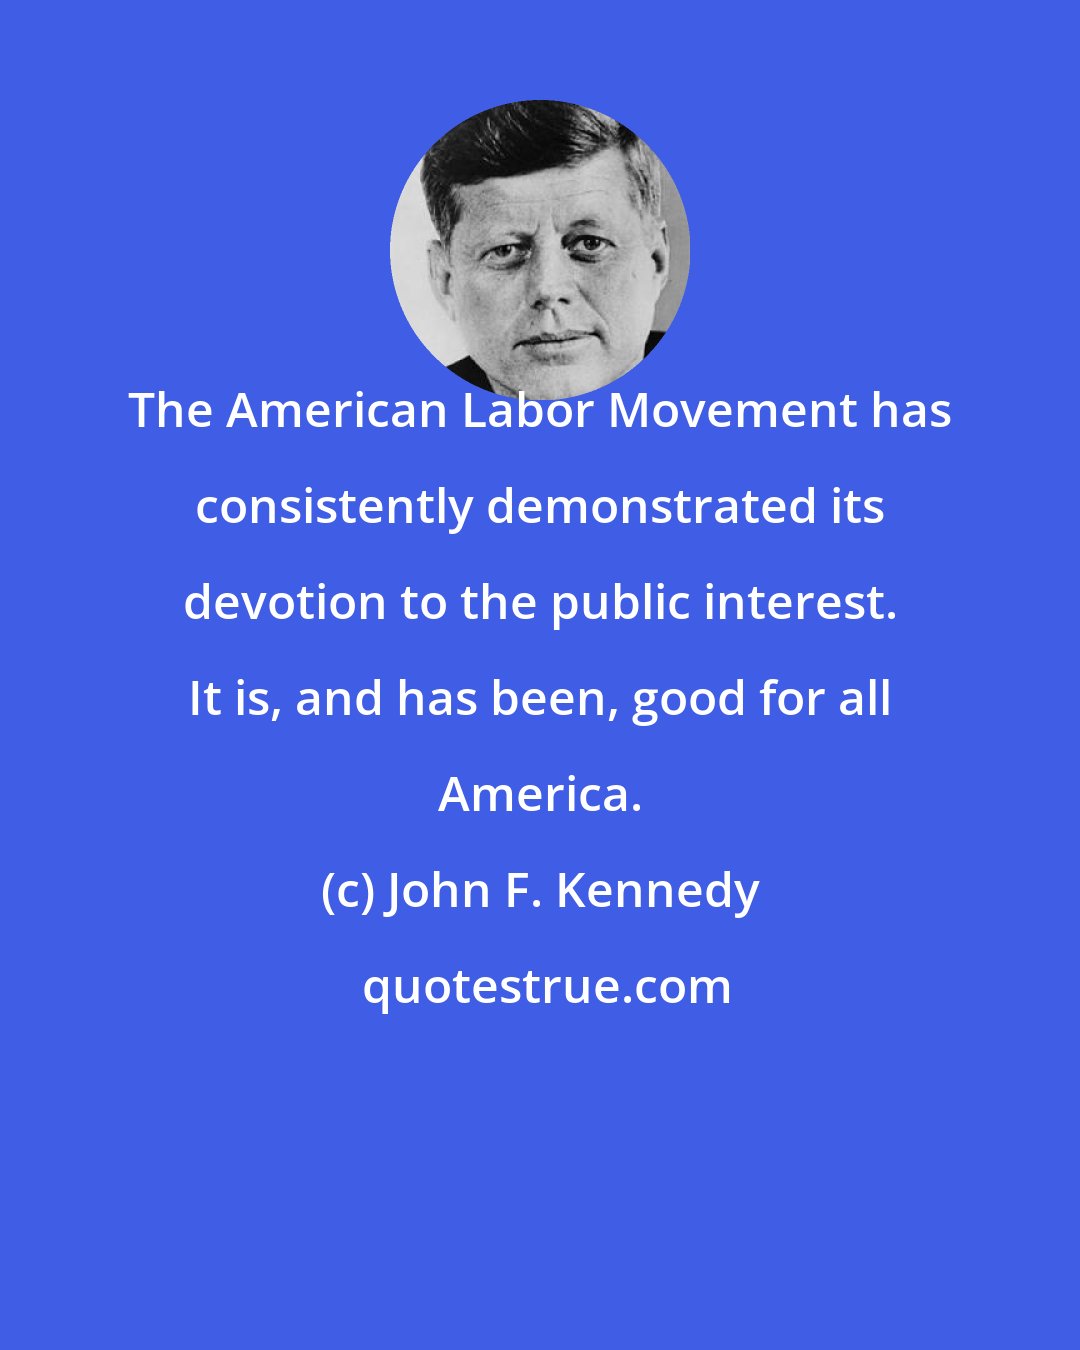 John F. Kennedy: The American Labor Movement has consistently demonstrated its devotion to the public interest. It is, and has been, good for all America.